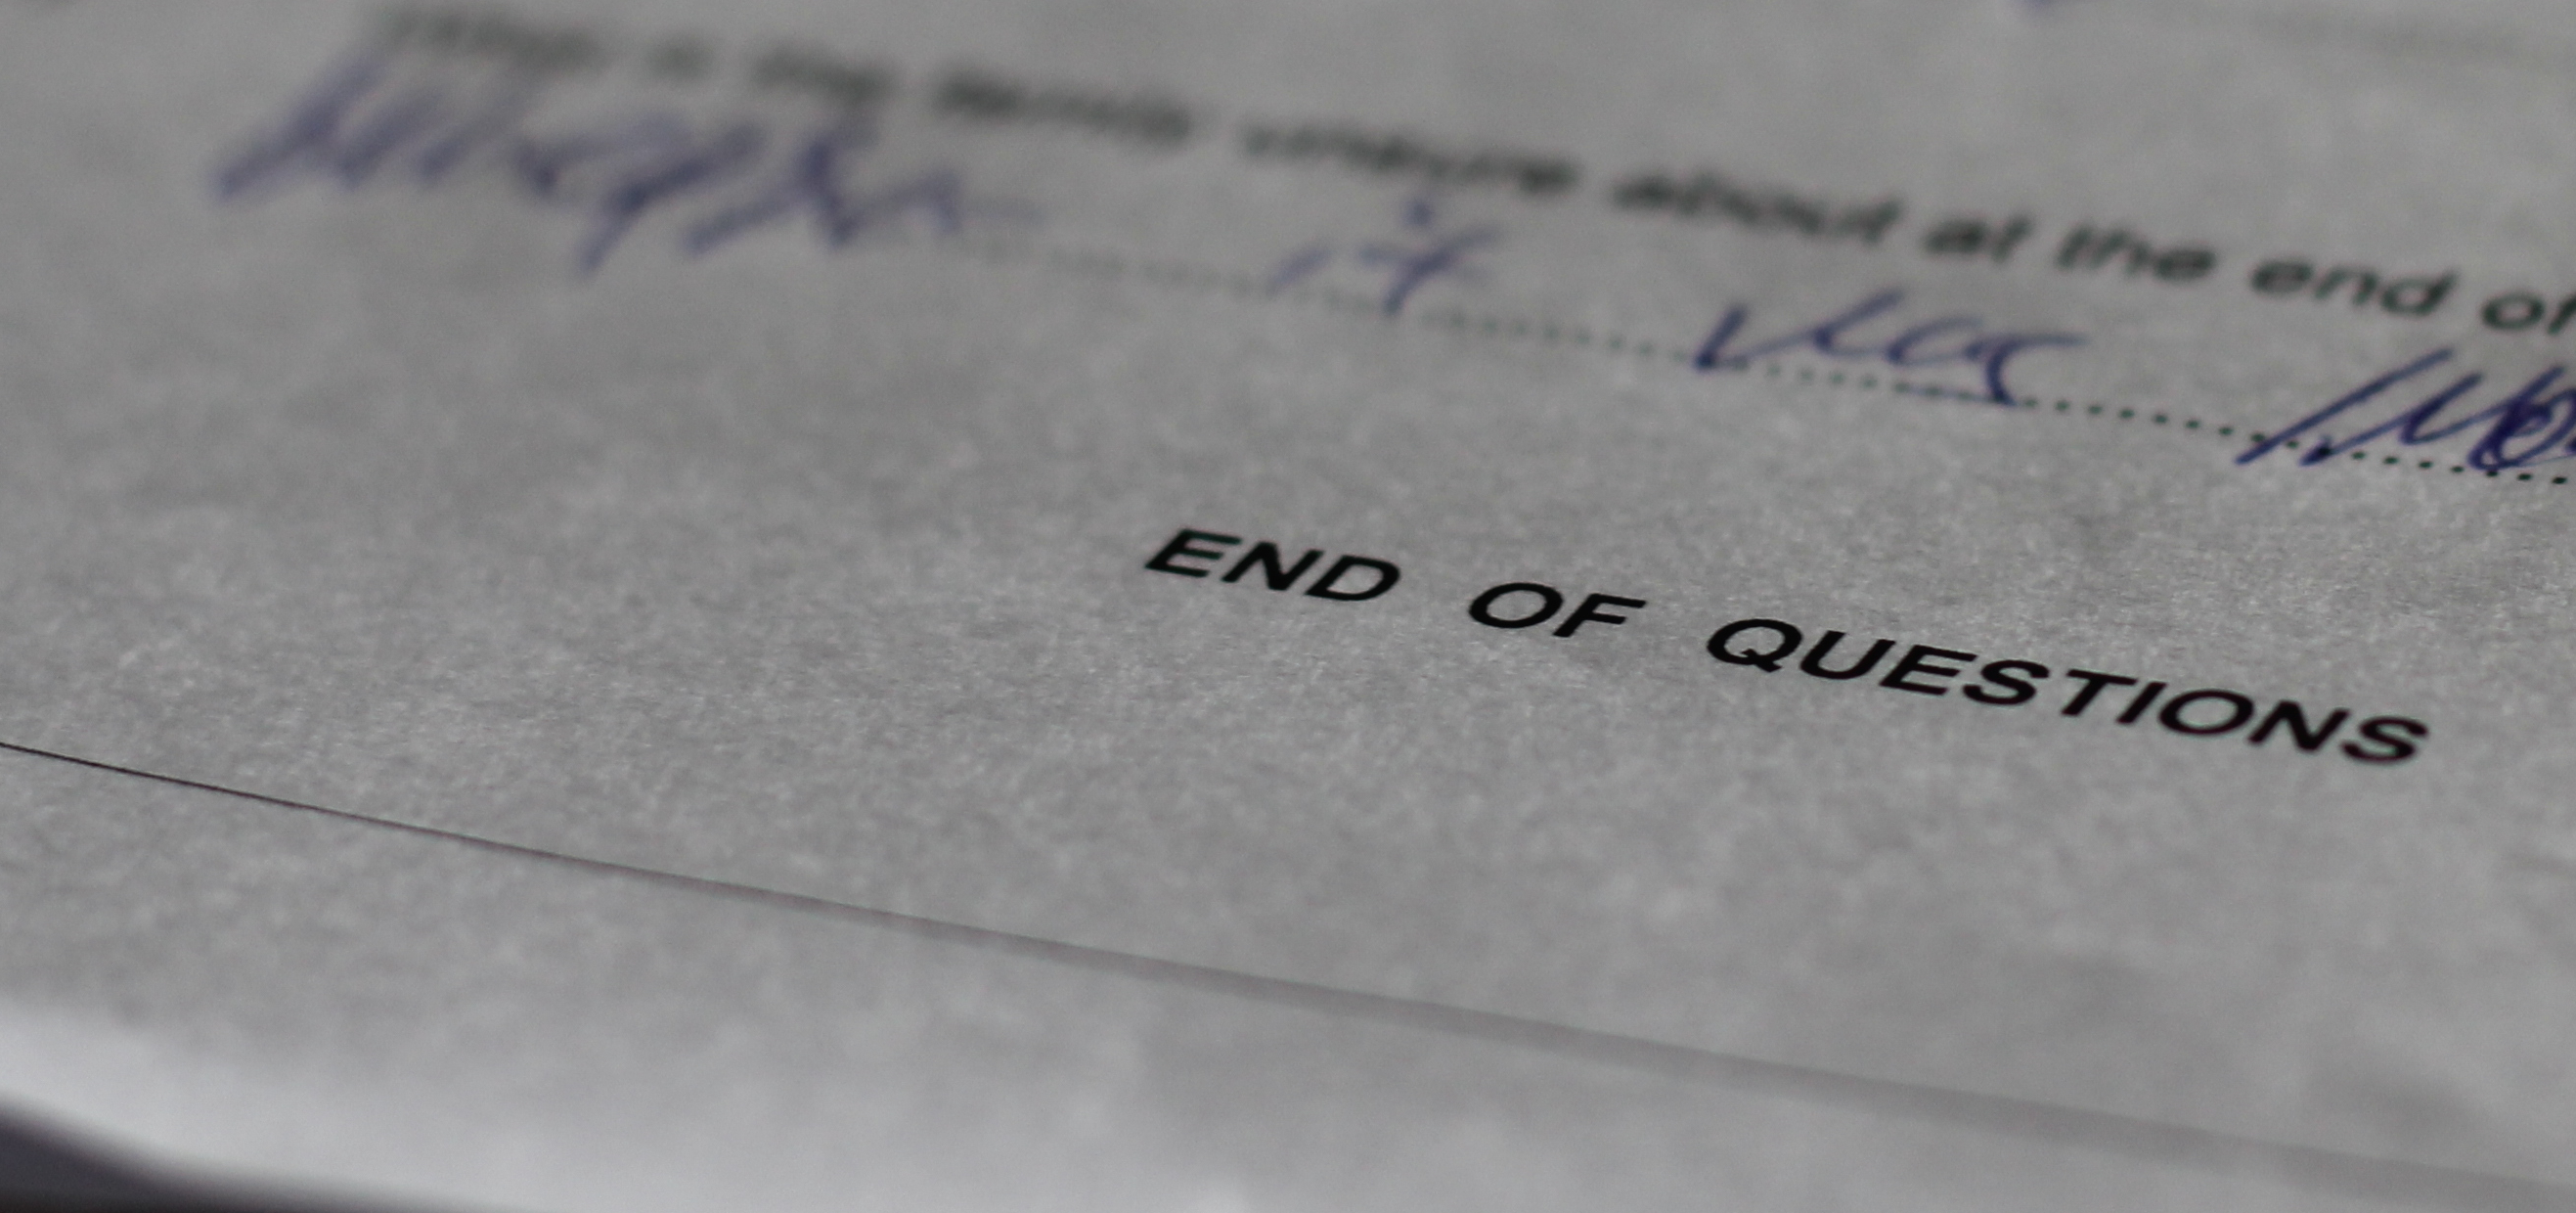 An exams paper with the words "End of Questions" visible.